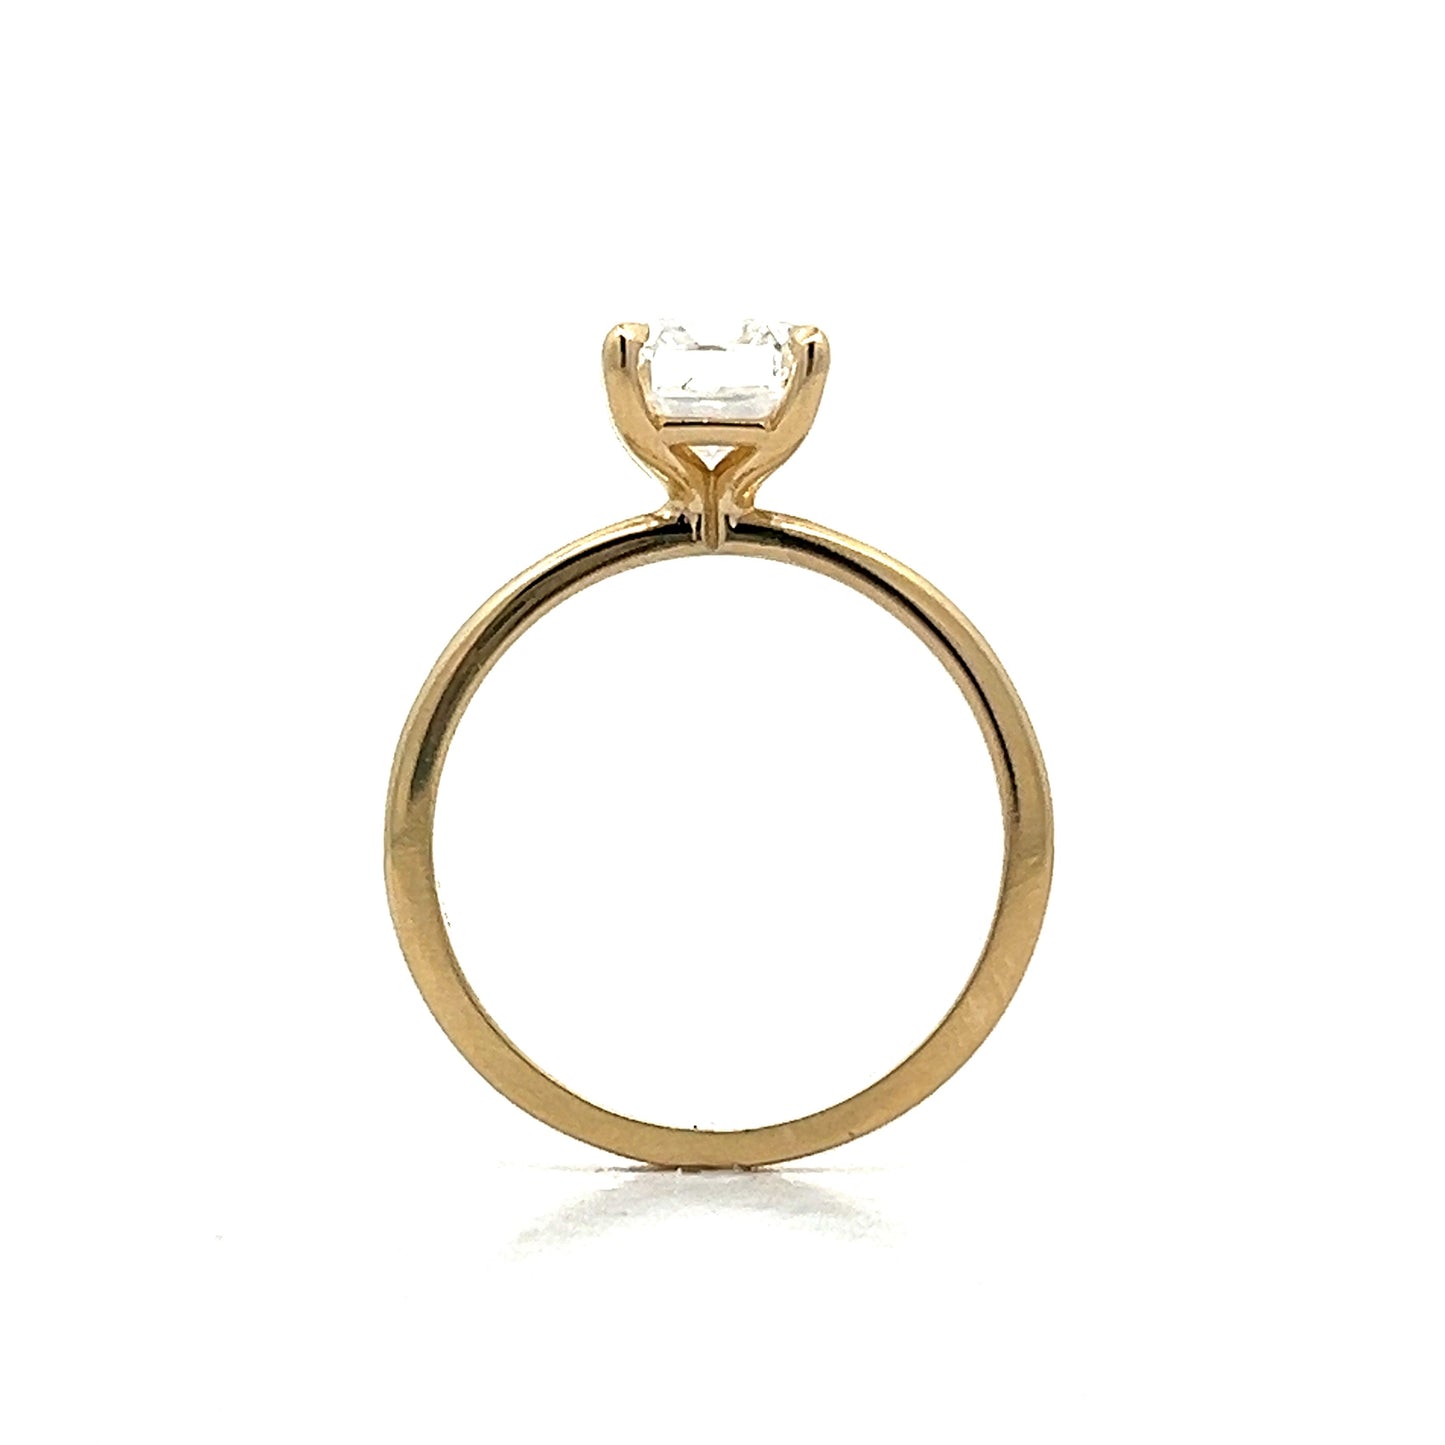 1.90 Radiant Cut Diamond Engagement Ring in Yellow Gold